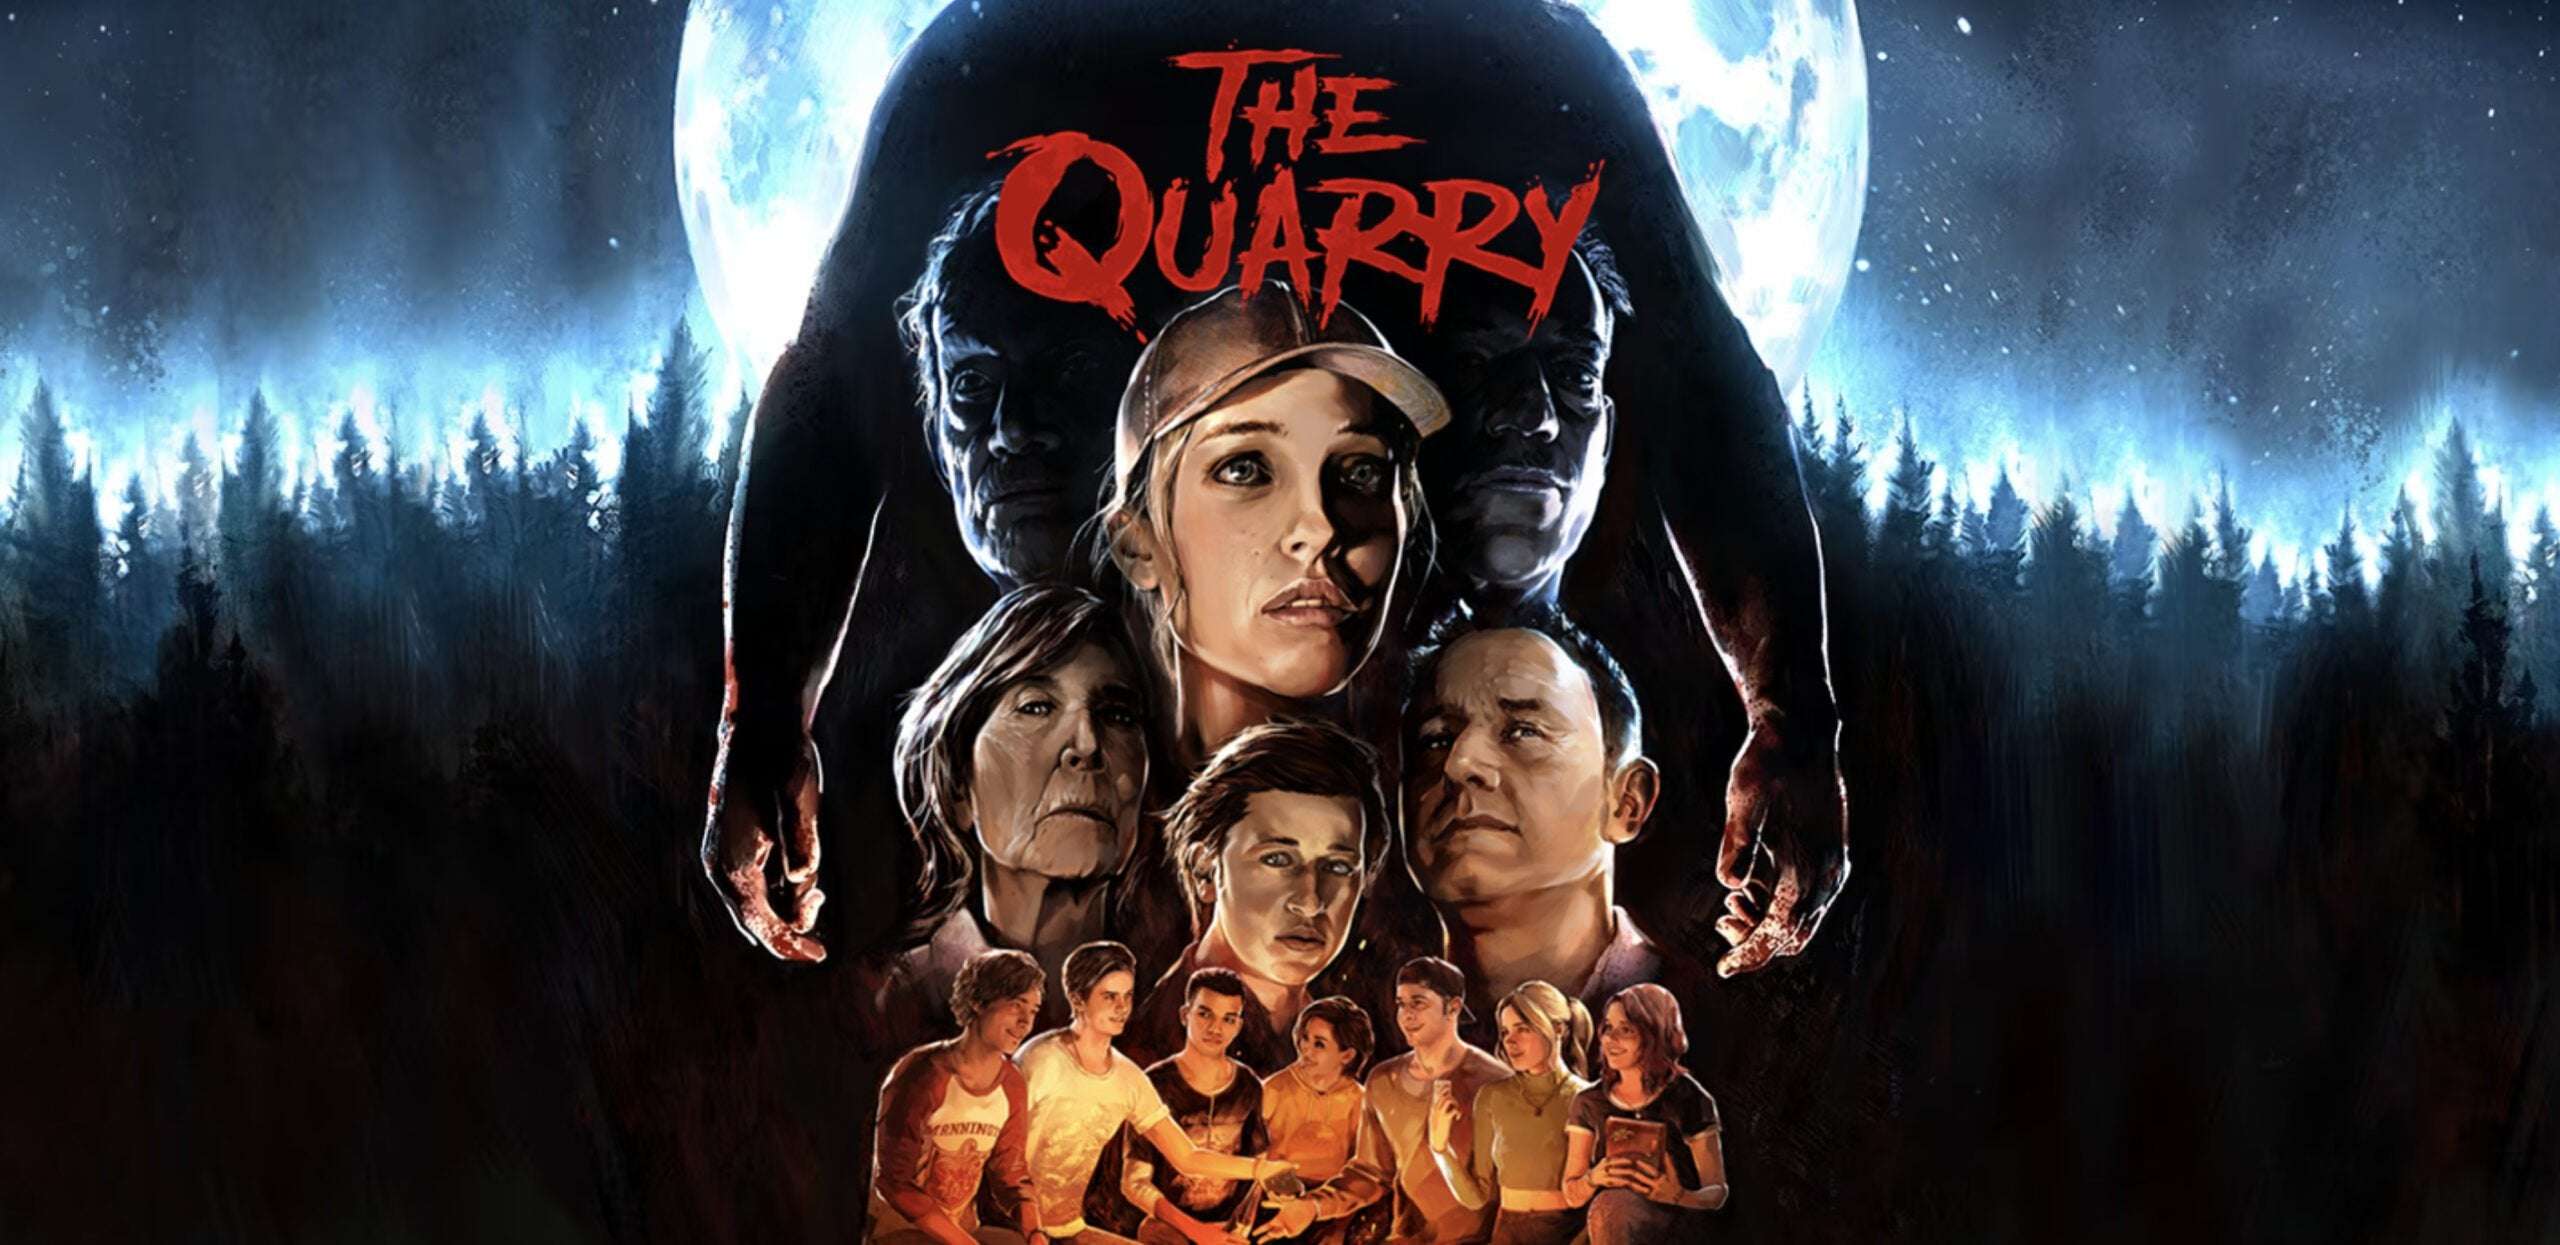 image for The Quarry director says his next game will be ‘just as big’ and could deviate from teen horror